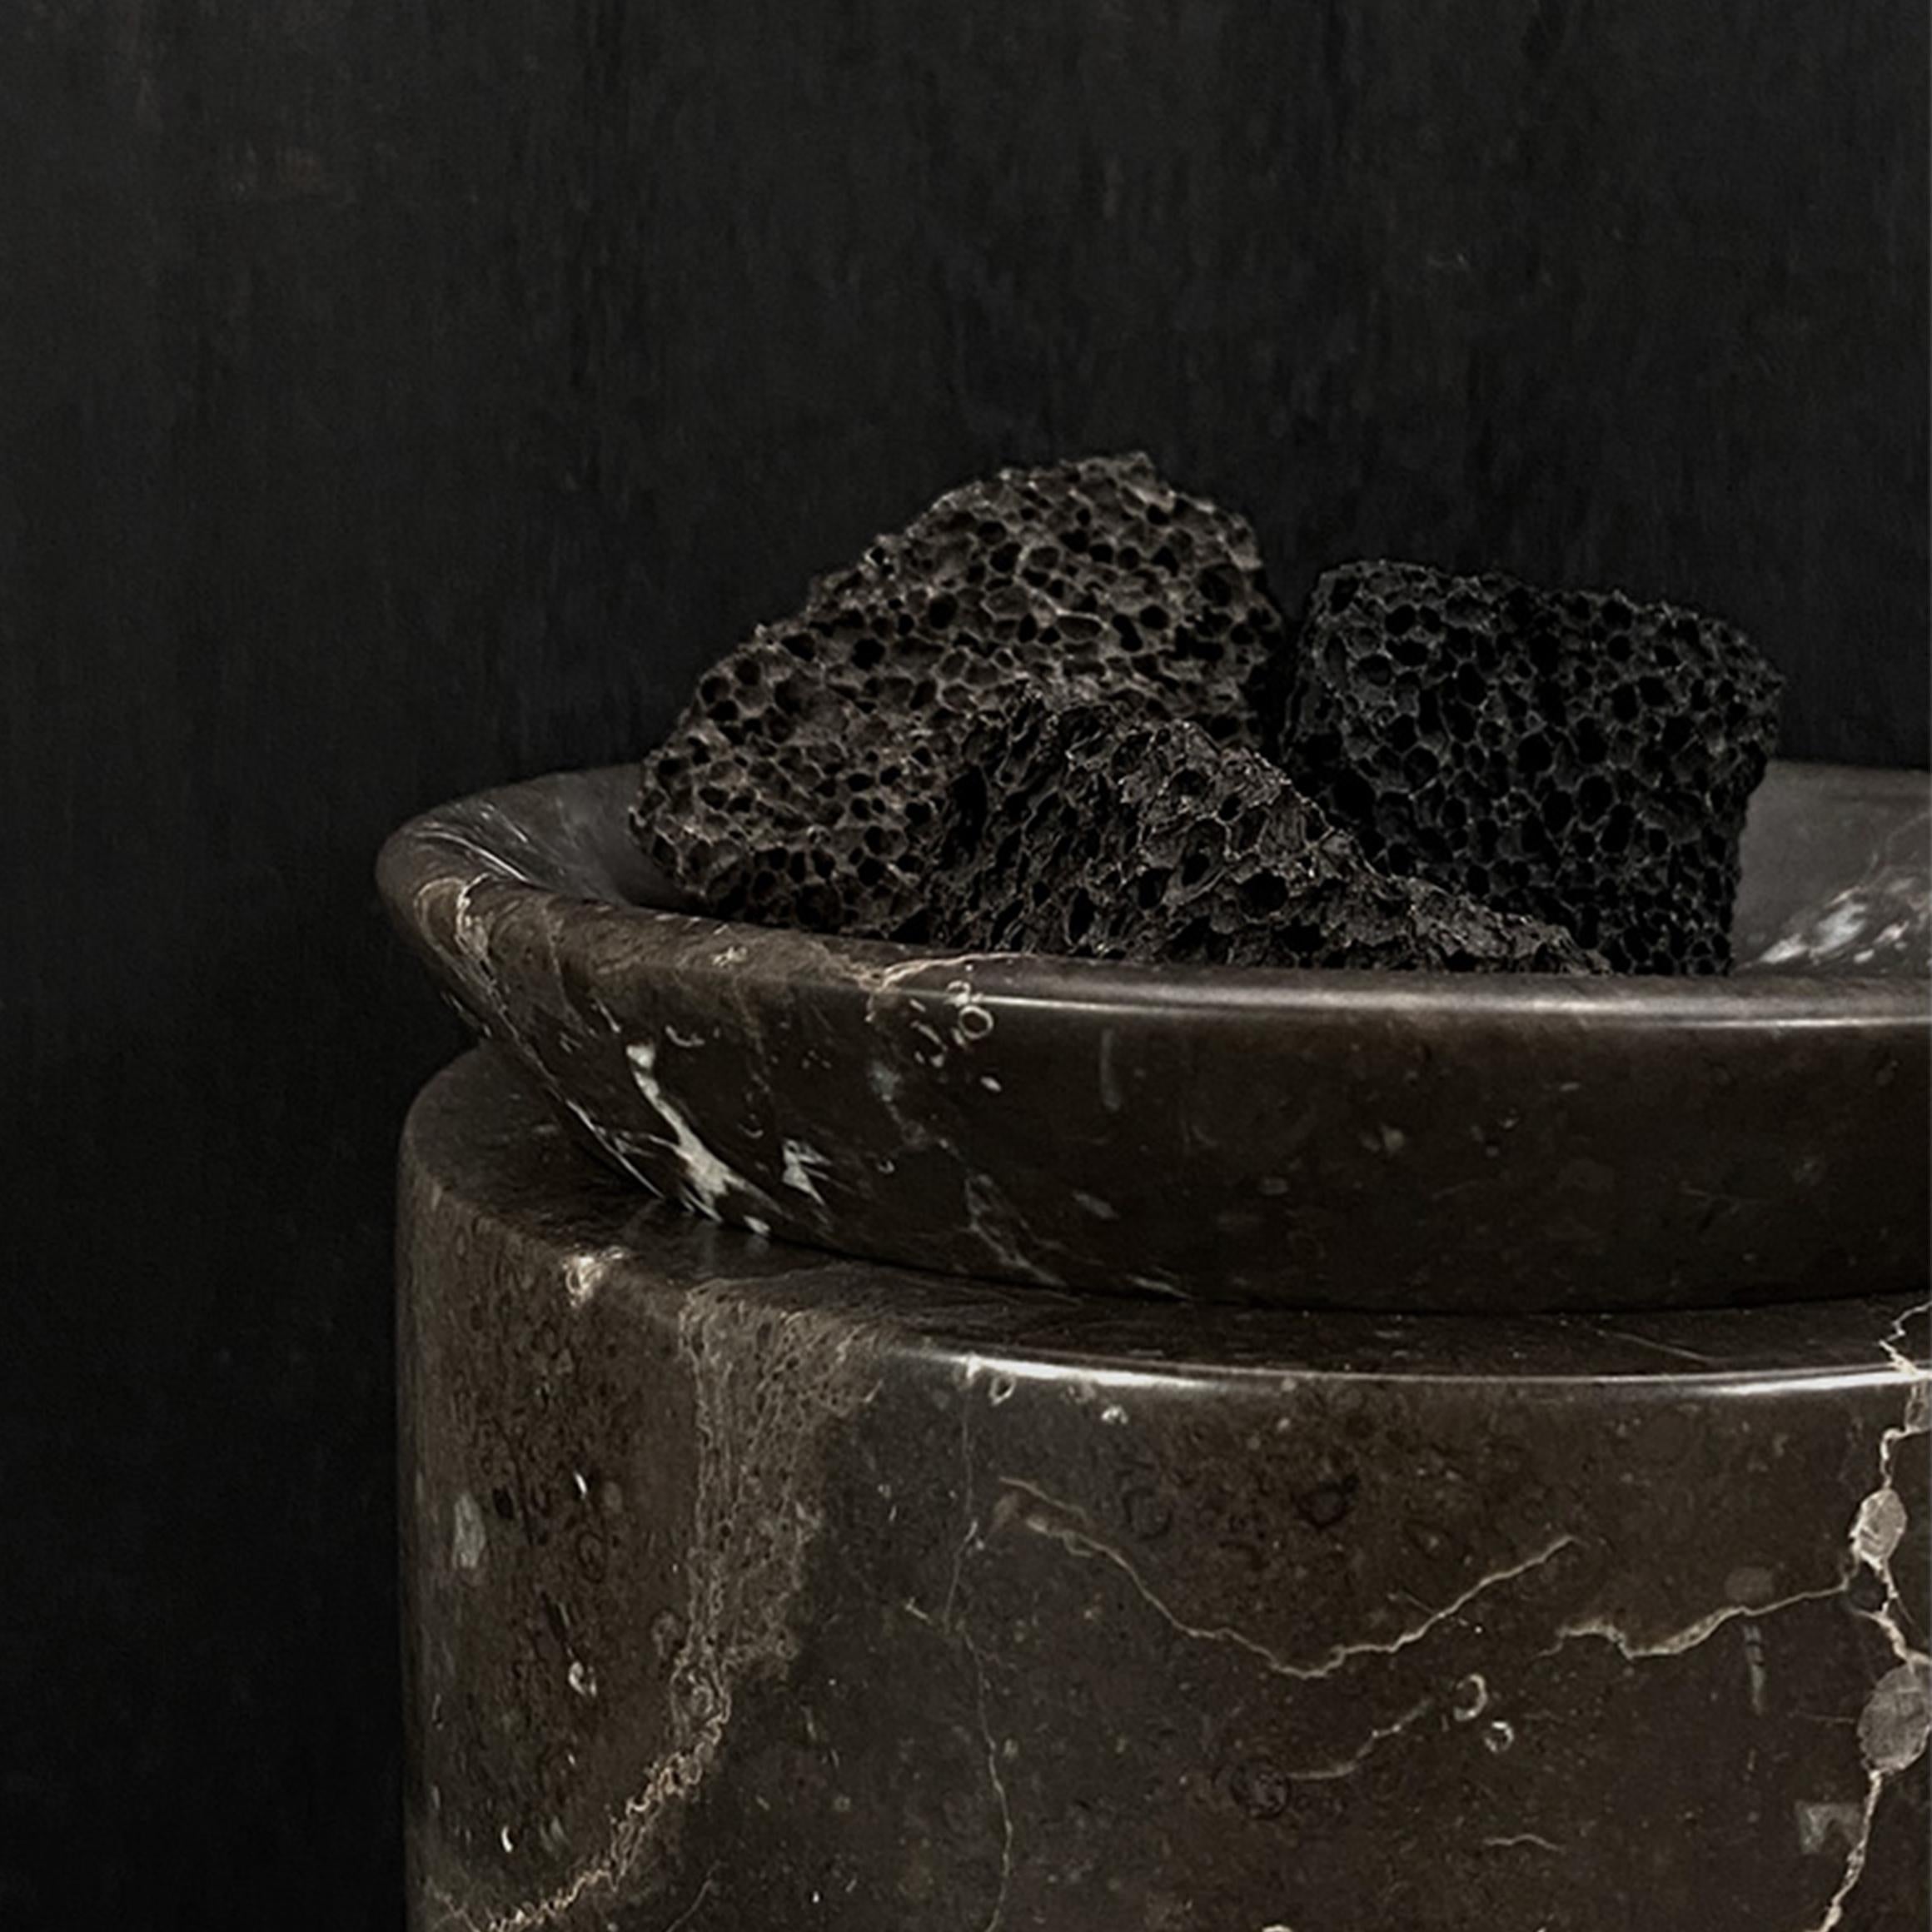 EDO Canister Large in the colour shadow black is a beautiful marble jar with a small elevation in the lid. This simple and lovely canister or jar has an exclusive and timeless look that adorns all spaces. Because the marble is a natural stone, the